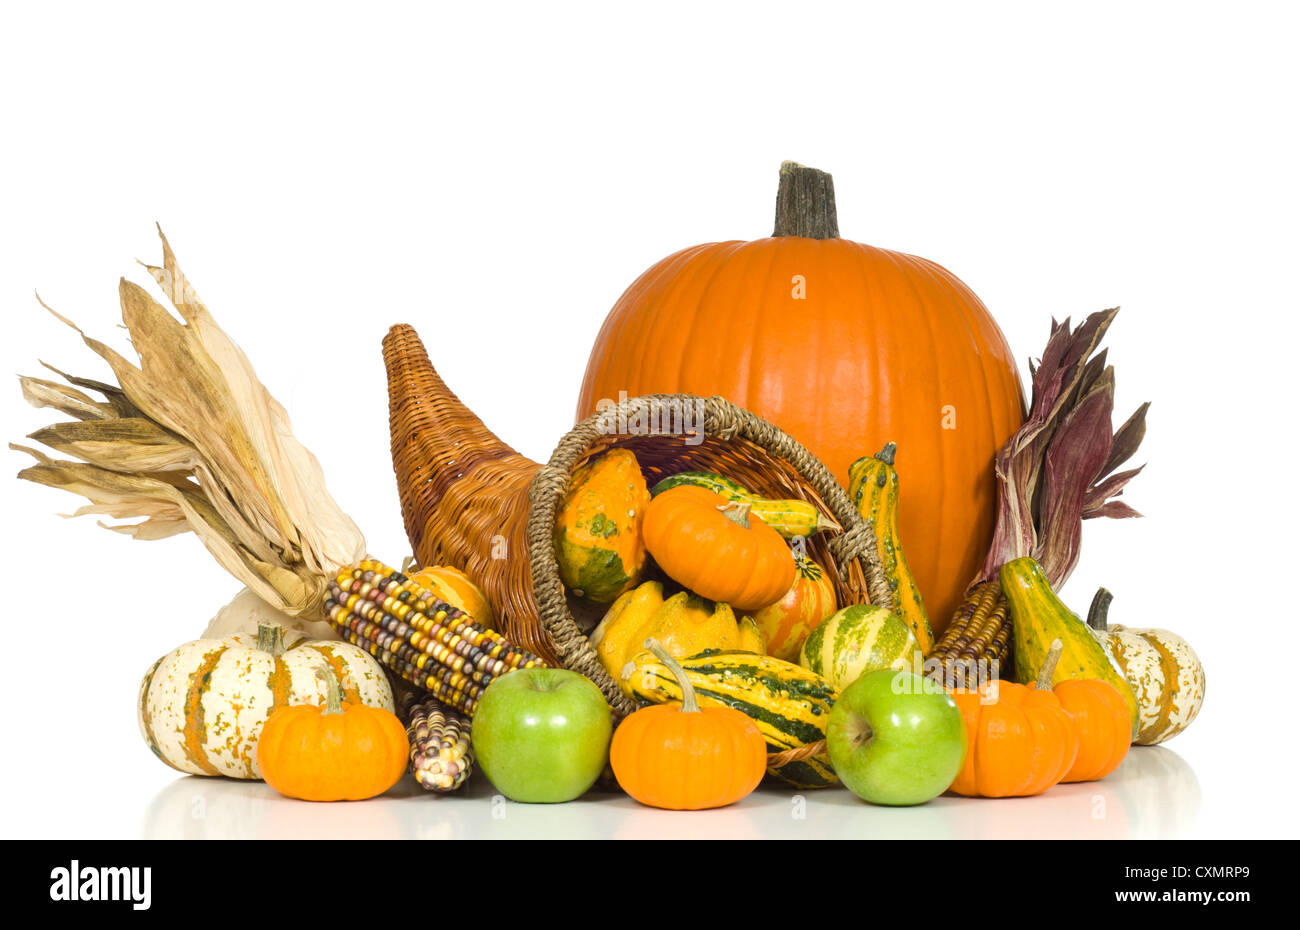 Cornucopia with fall harvest items including pumpkins, gourds, apples ...